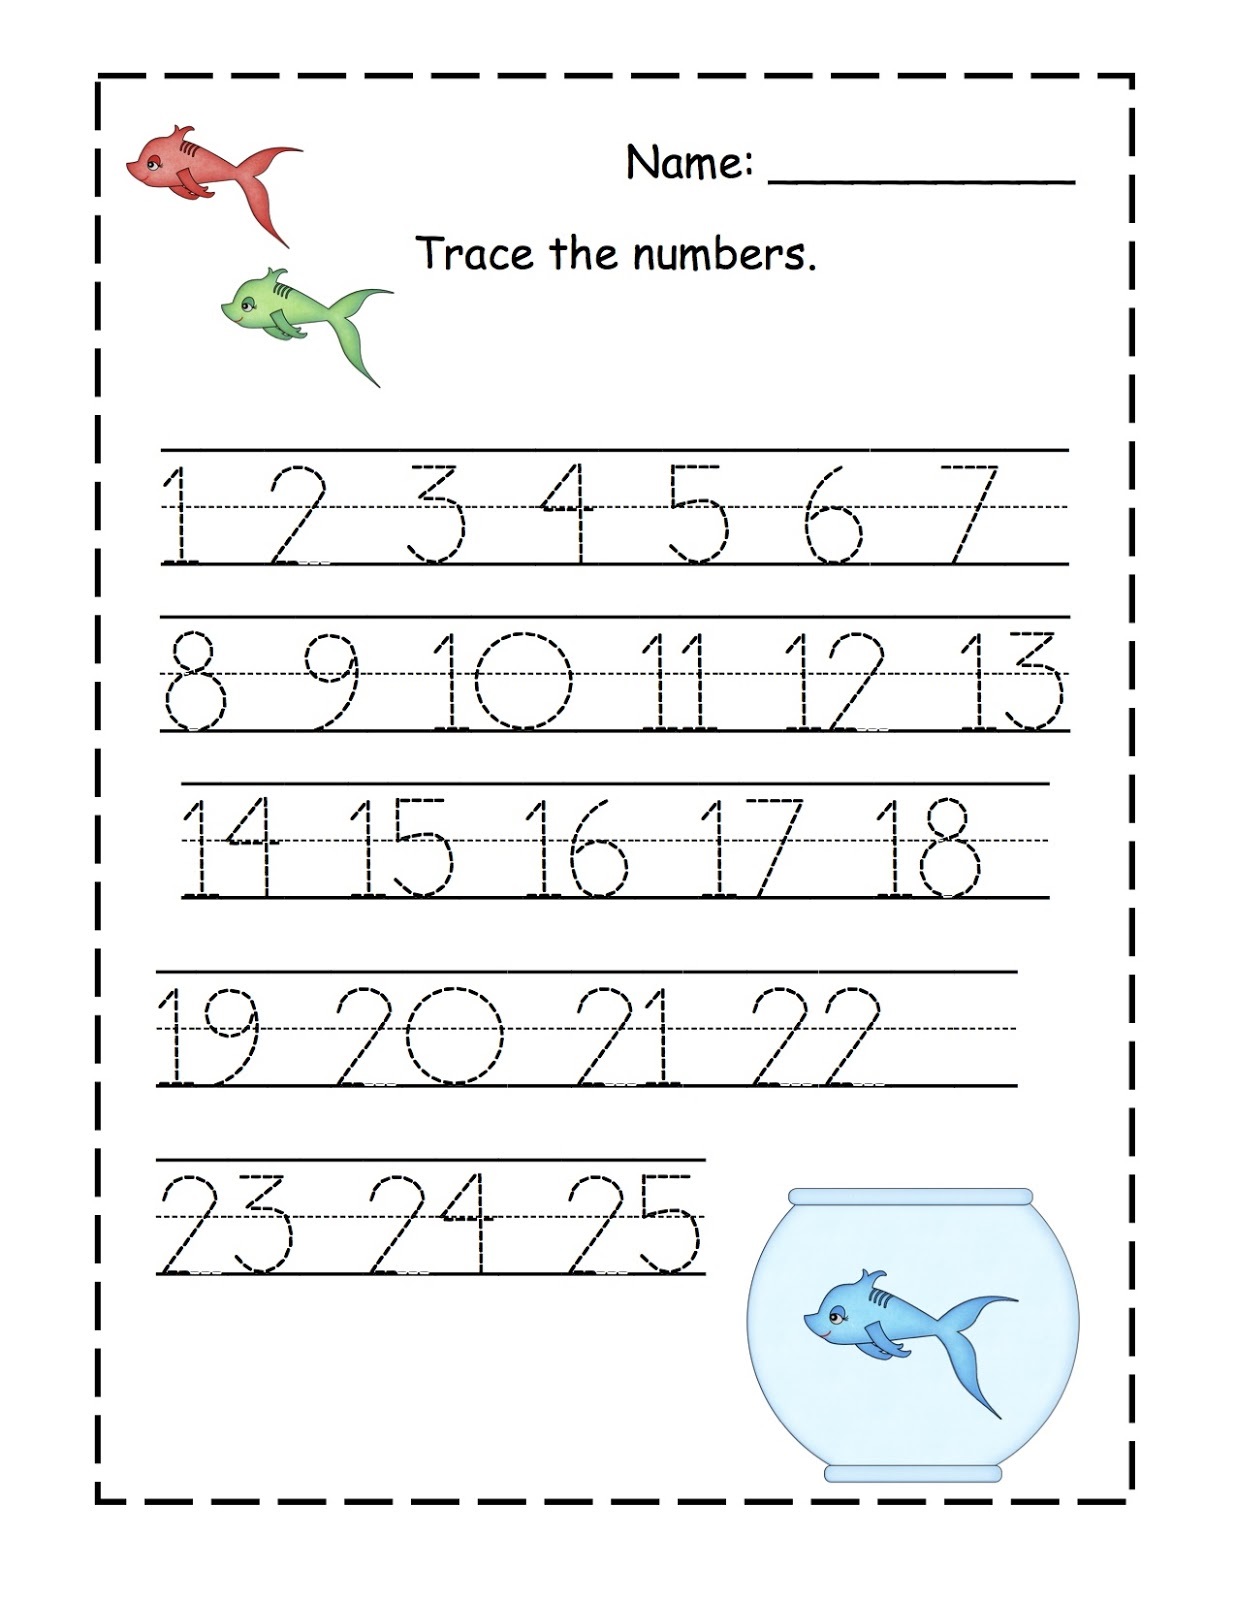 tracing-numbers-1-to-100-worksheet